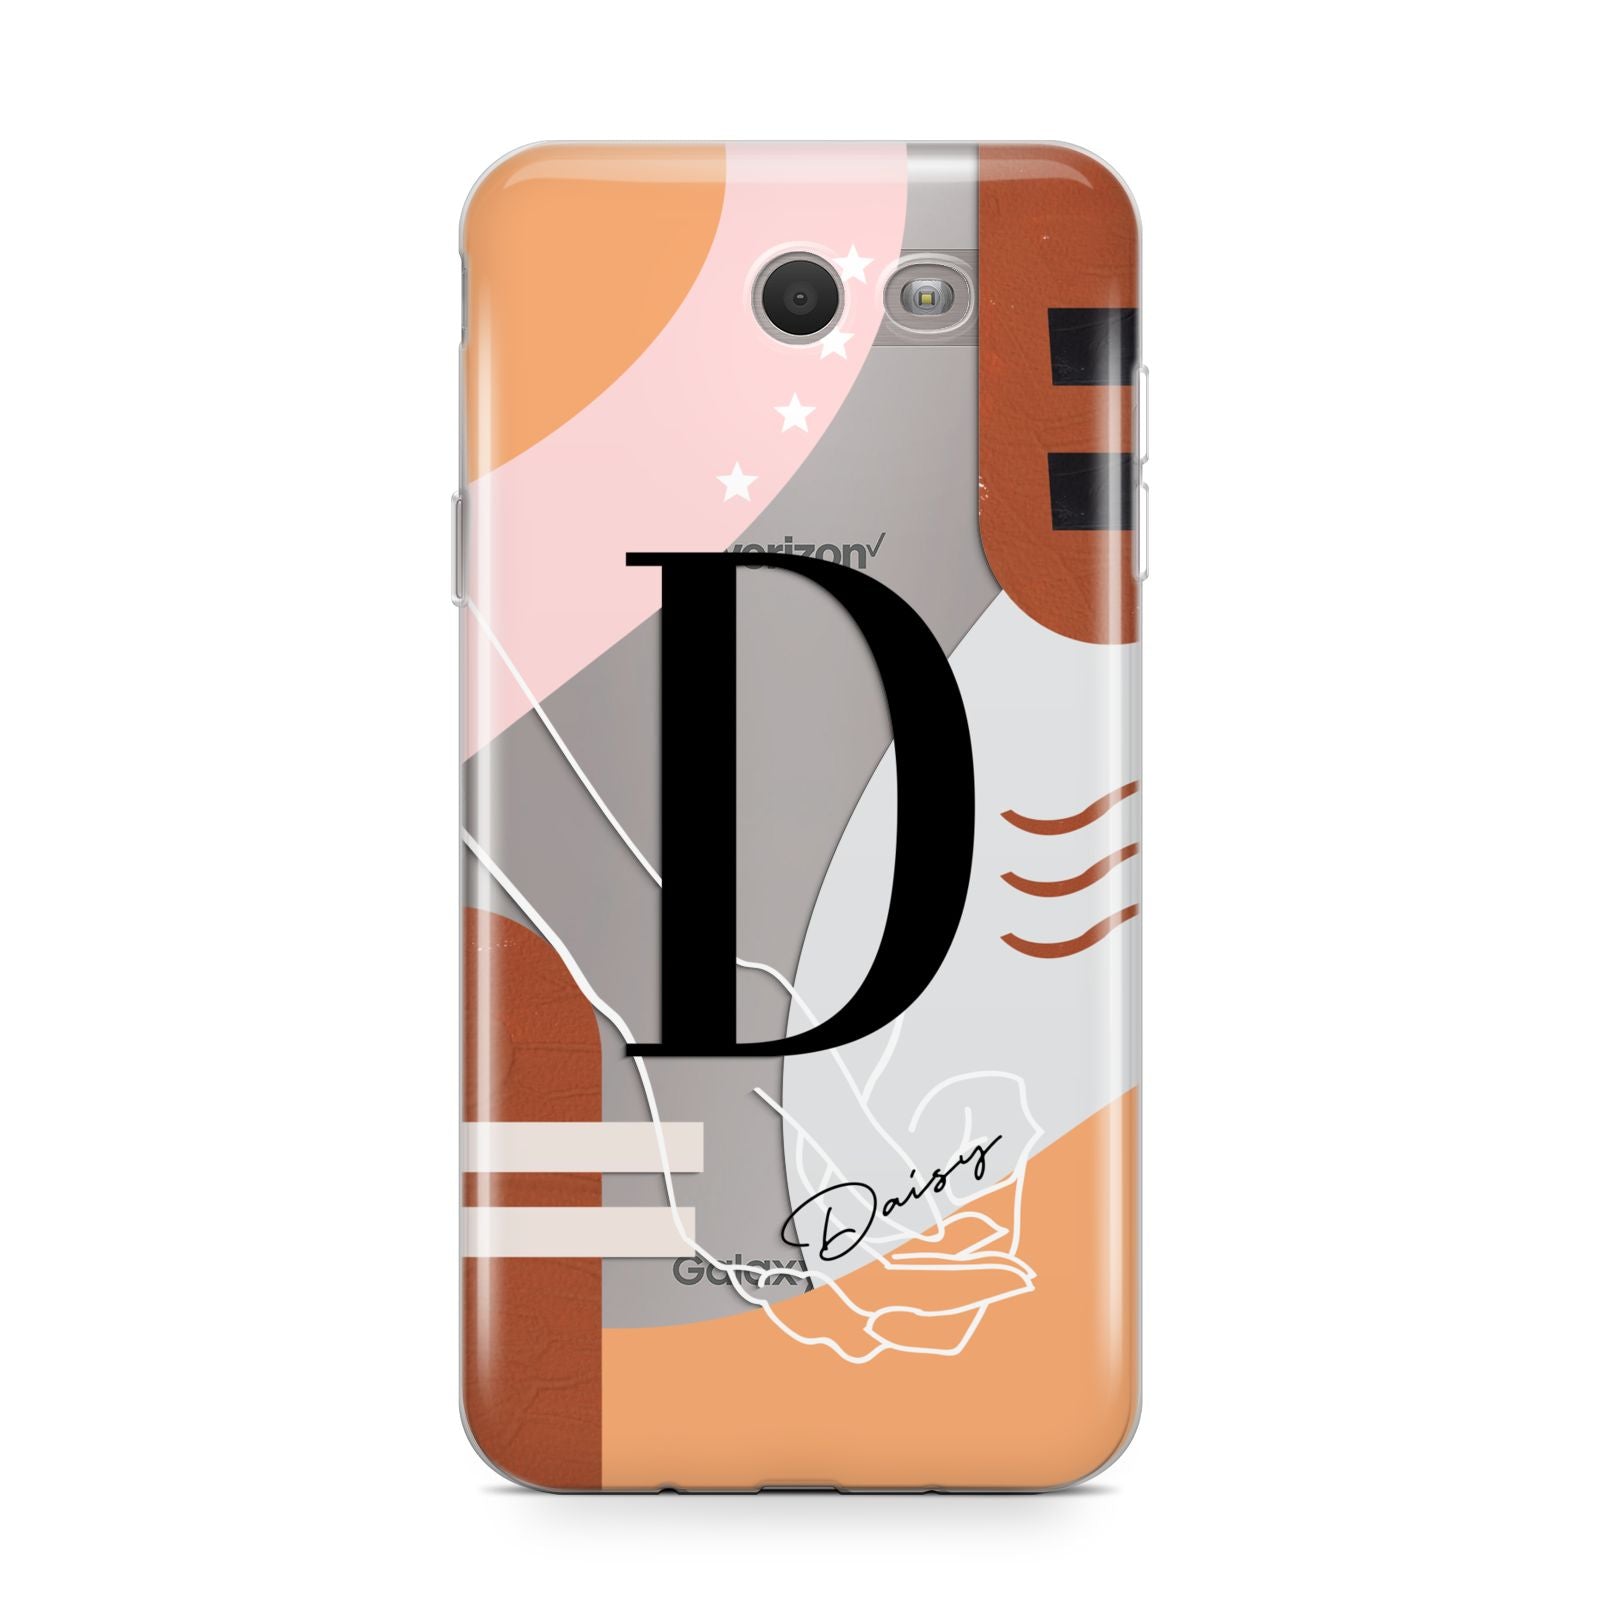 Personalised Abstract Samsung Galaxy J7 2017 Case